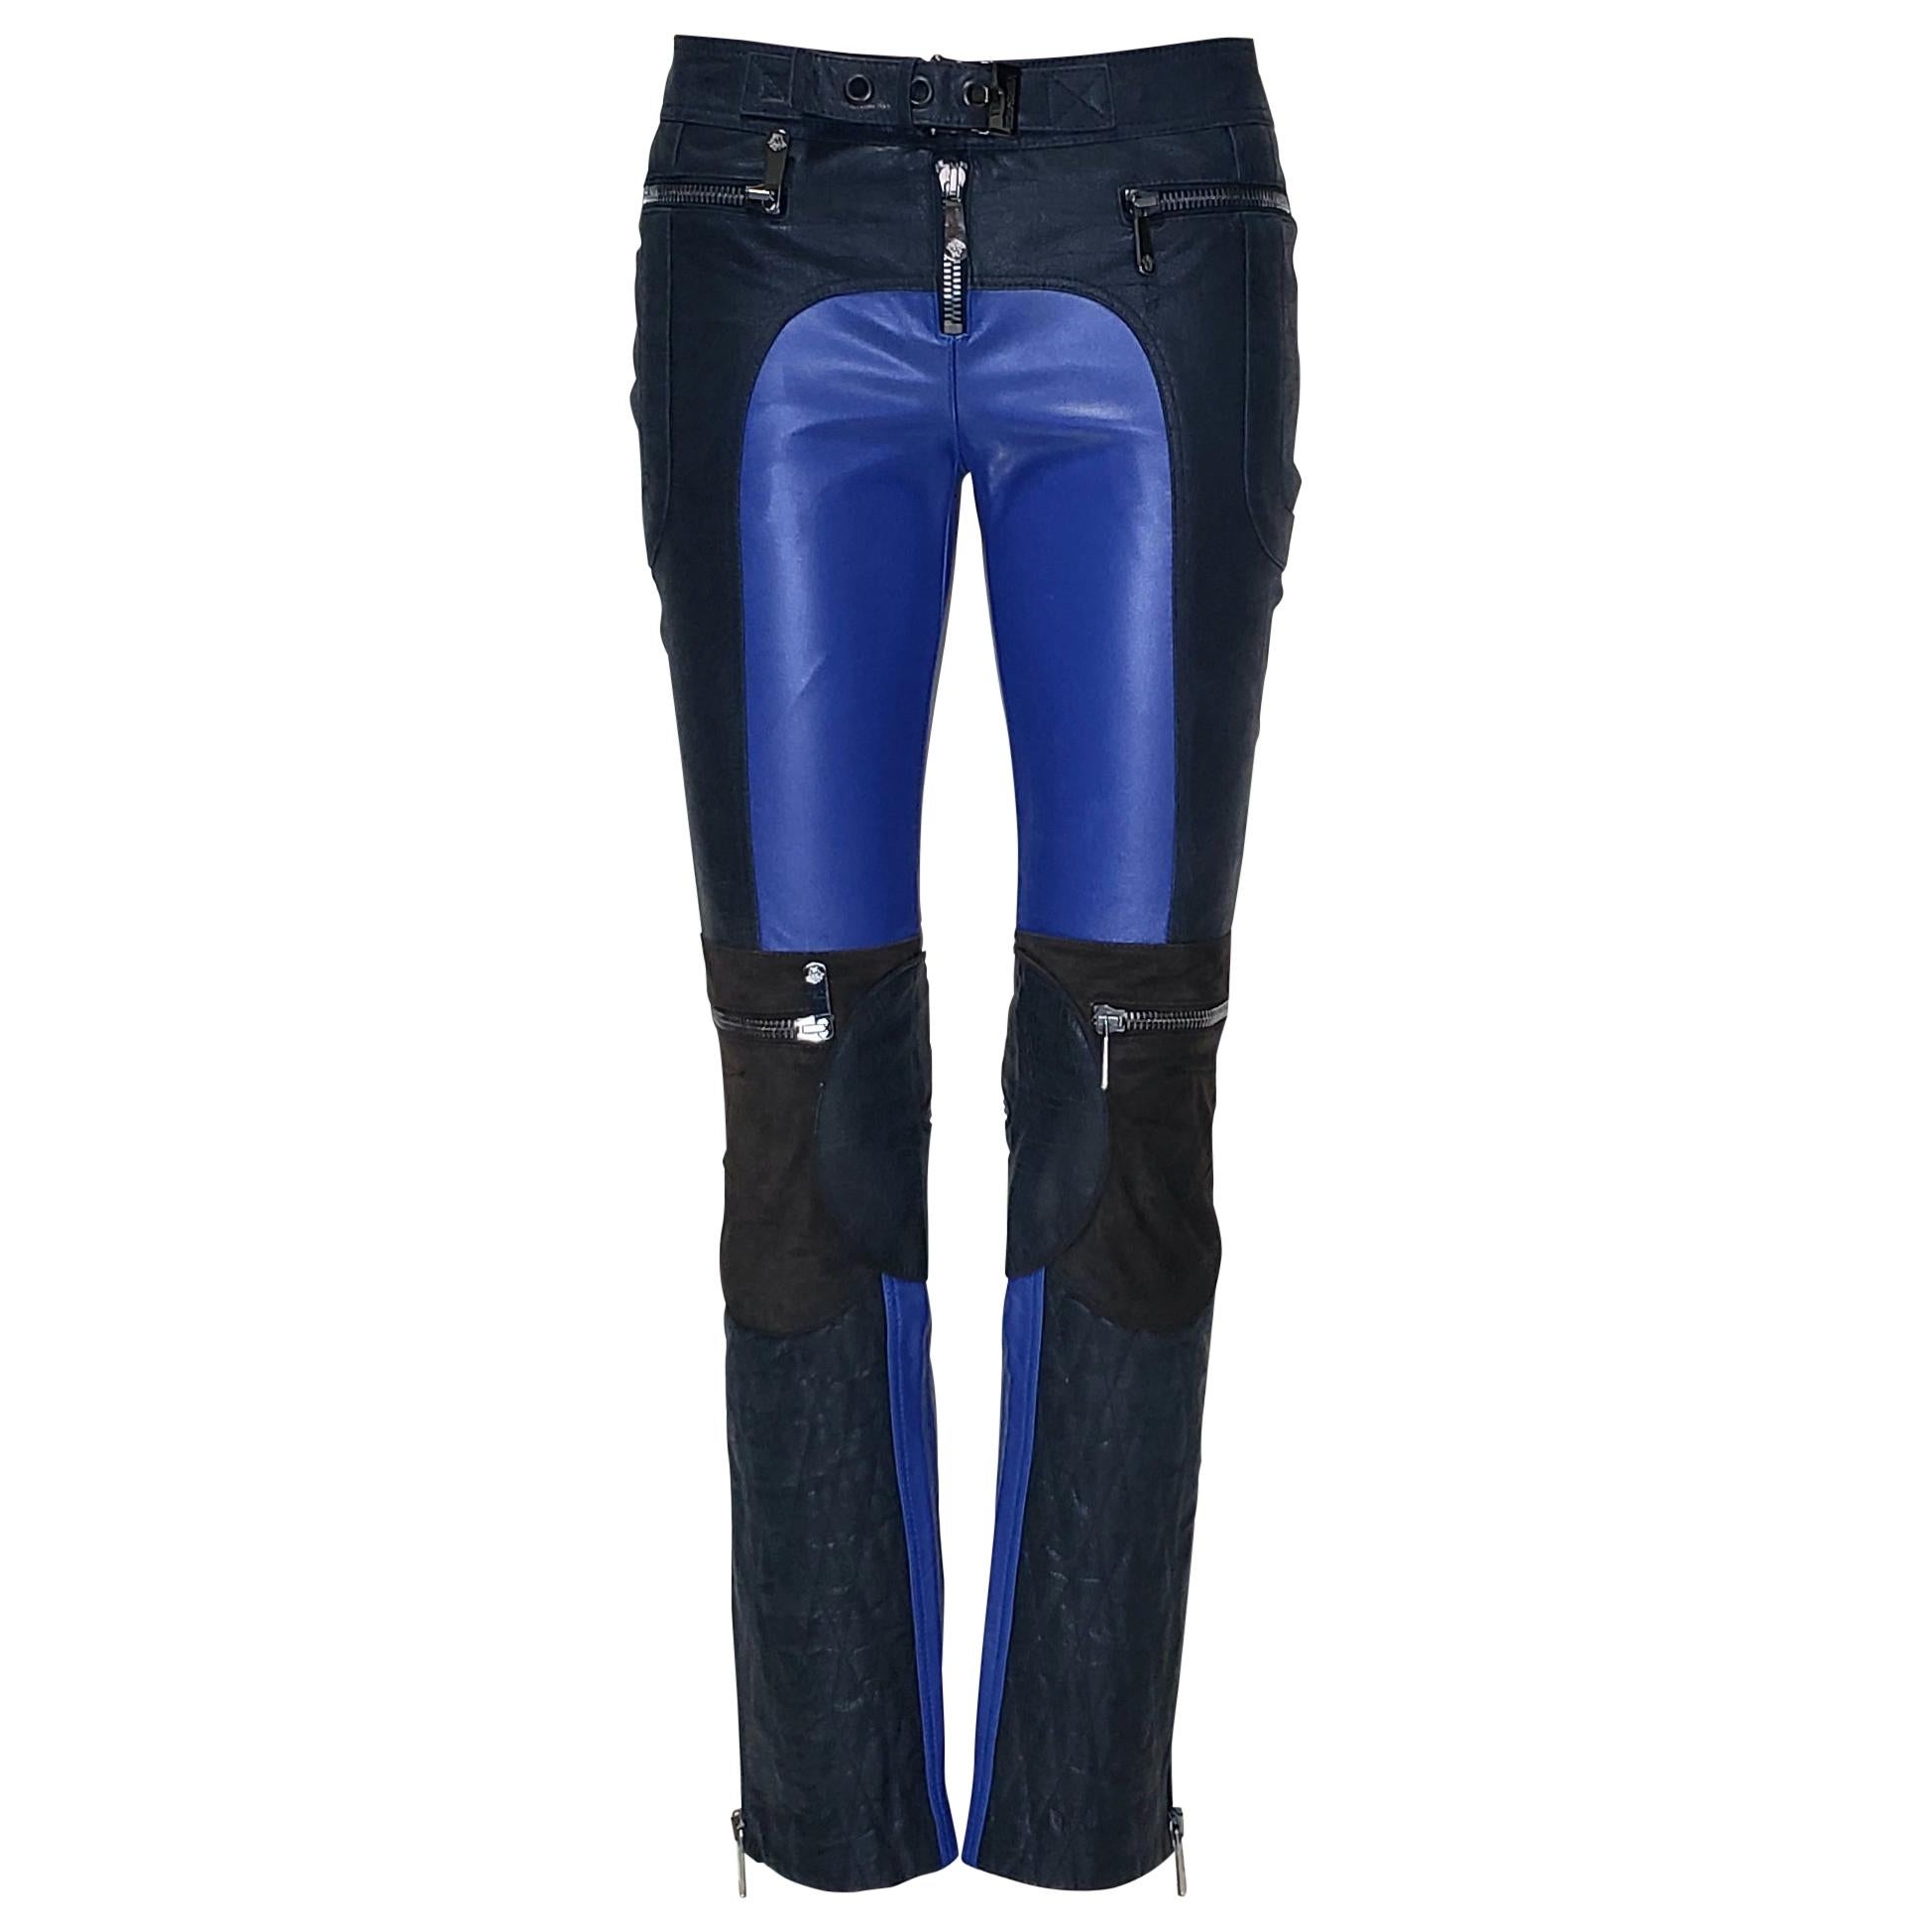 F/W 2010 L #13 VERSACE BLUE and NAVY BLUE MOTORCYCLE LEATHER PANTS size 38 - 2 For Sale